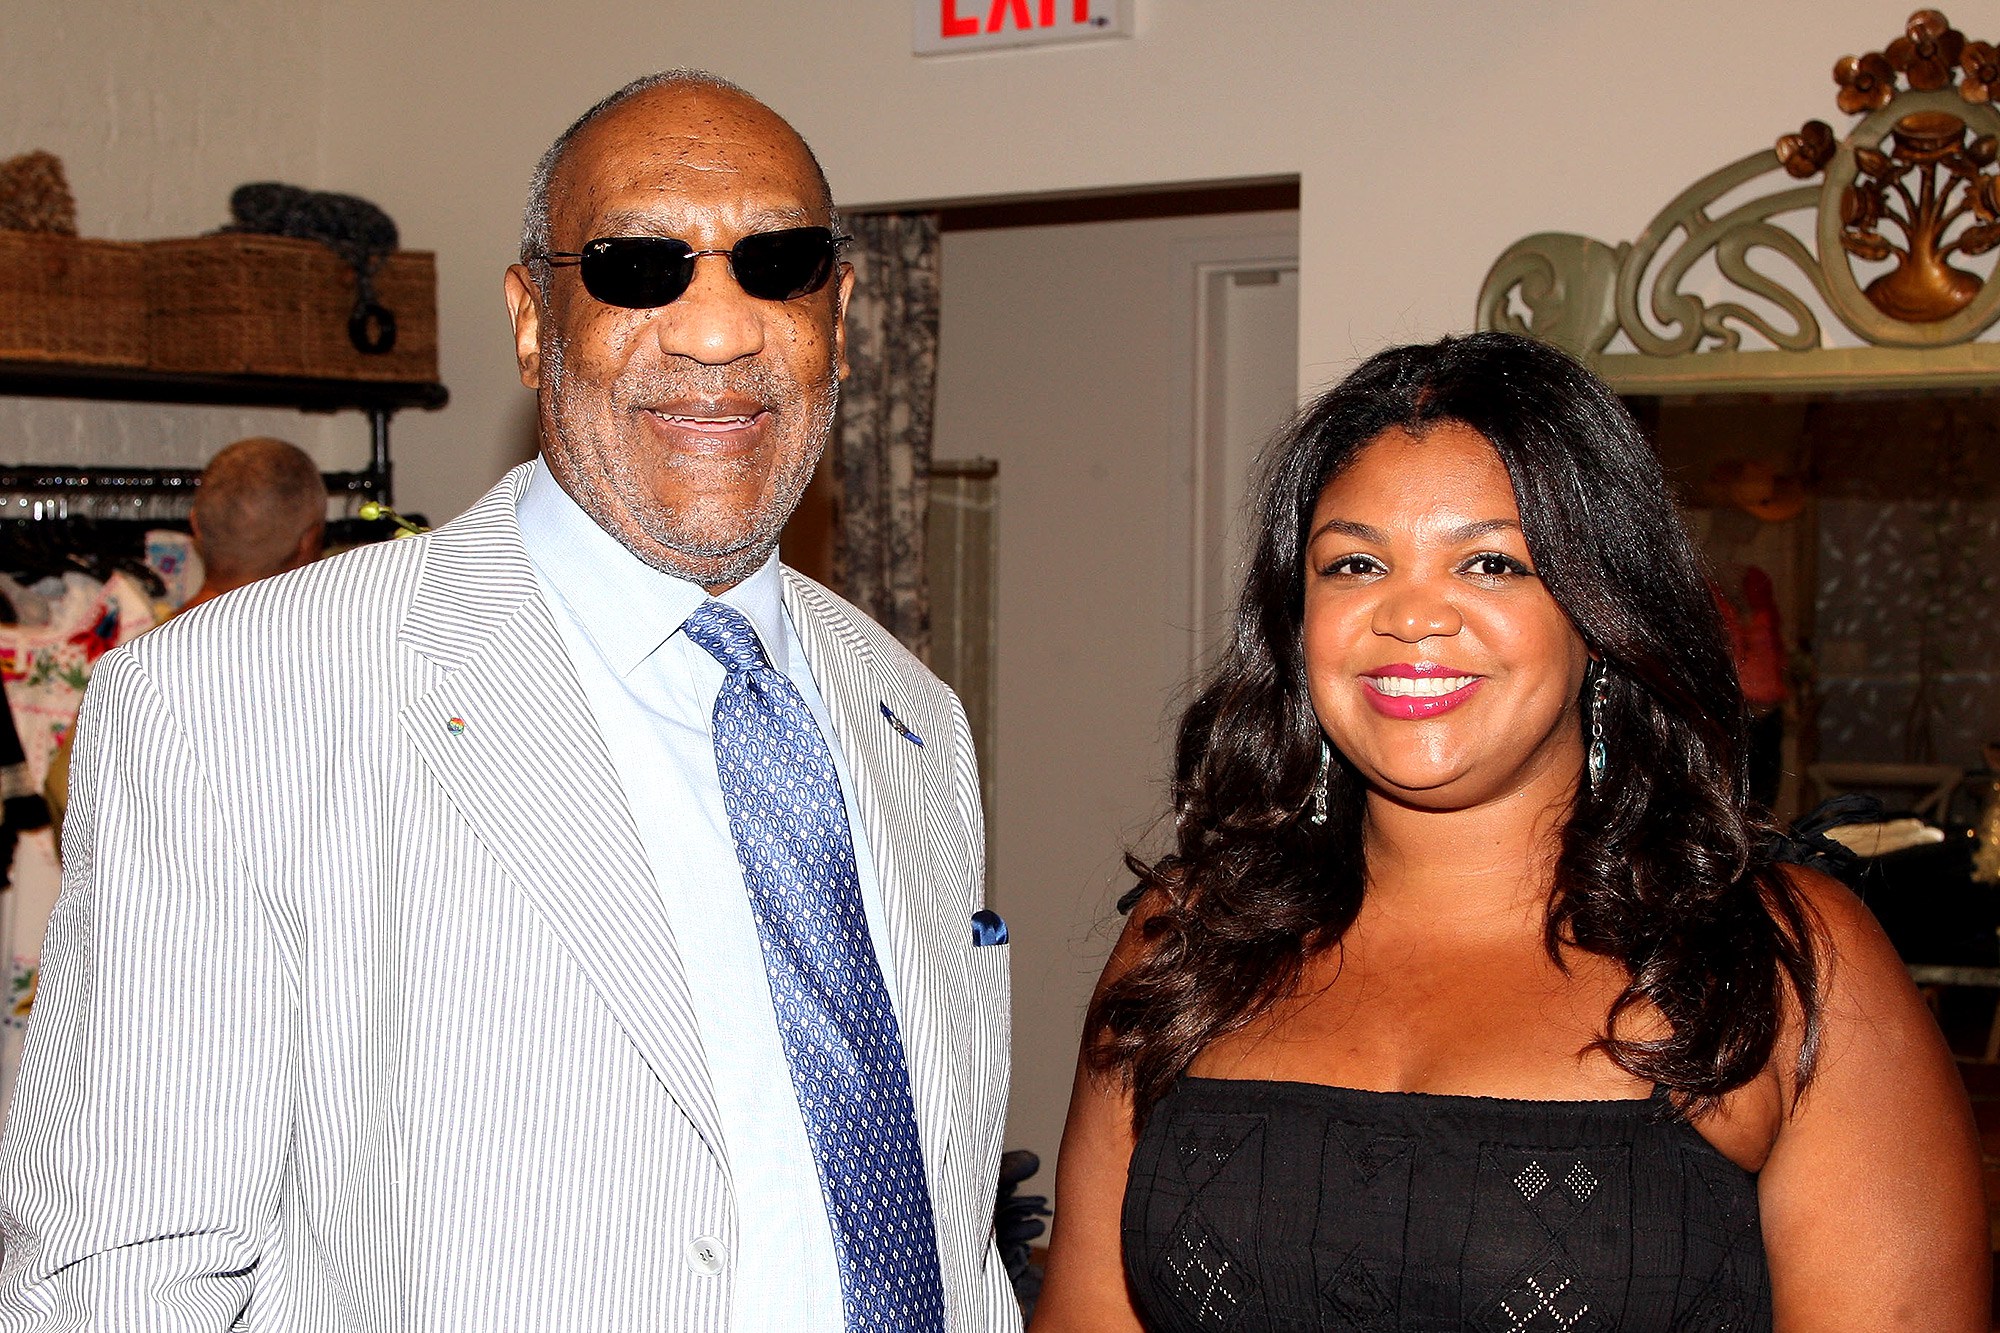 Evin Cosby and her father actor Bill Cosby attend the launch of her store pb&amp;Caviar on Aug. 7, 2008 in New York City. (Bryan Bedder&mdash;Getty Images)